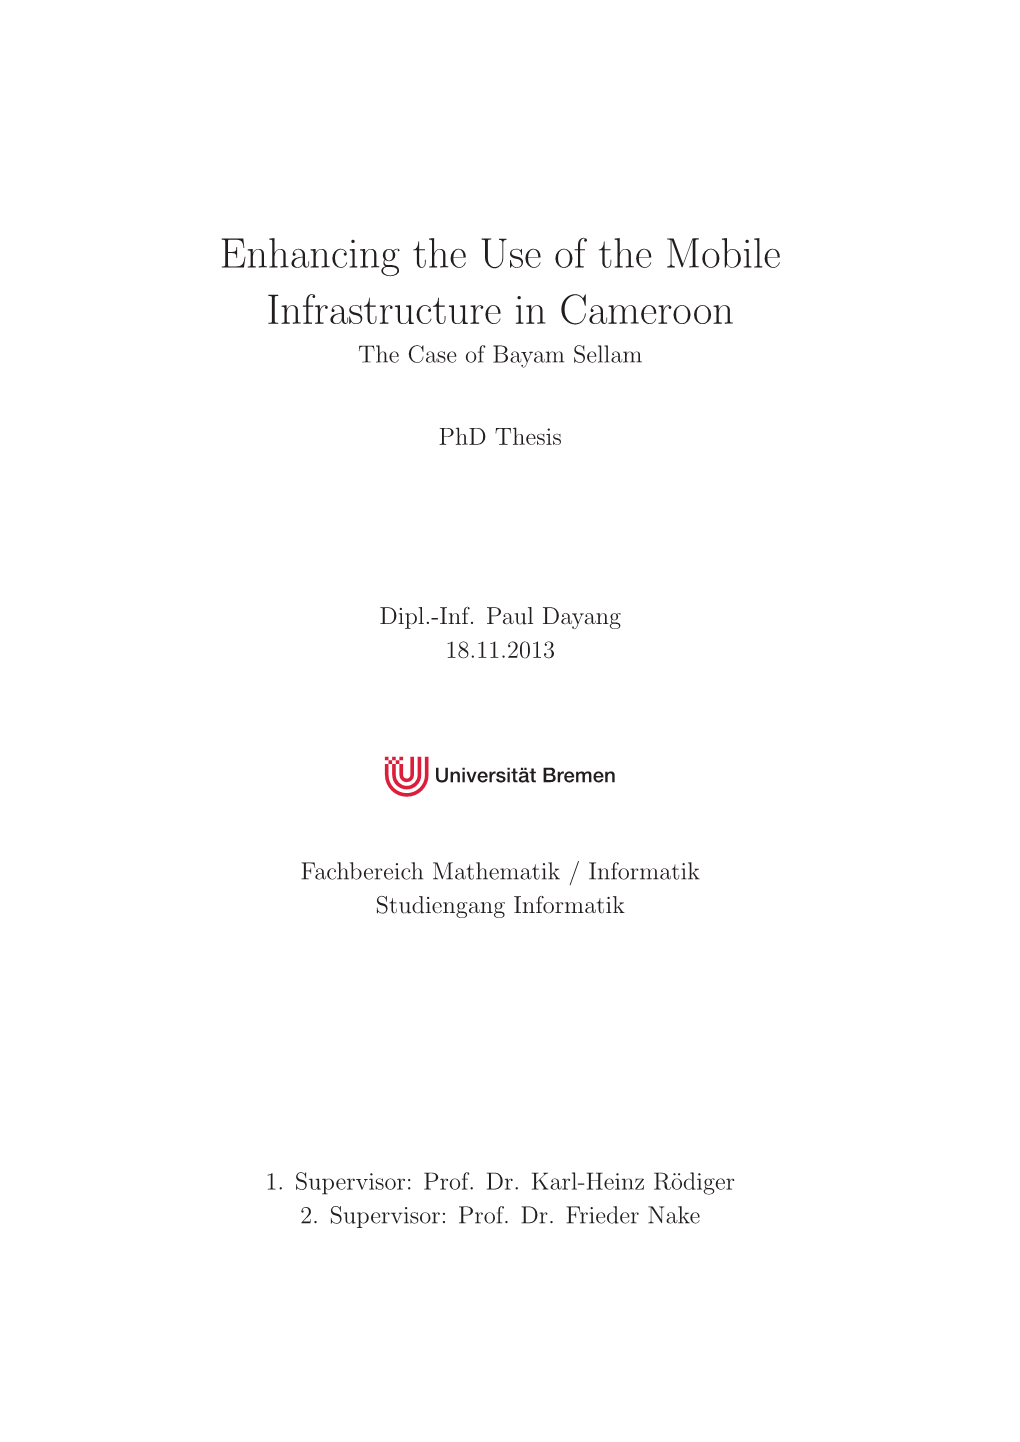 Enhancing the Use of the Mobile Infrastructure in Cameroon the Case of Bayam Sellam